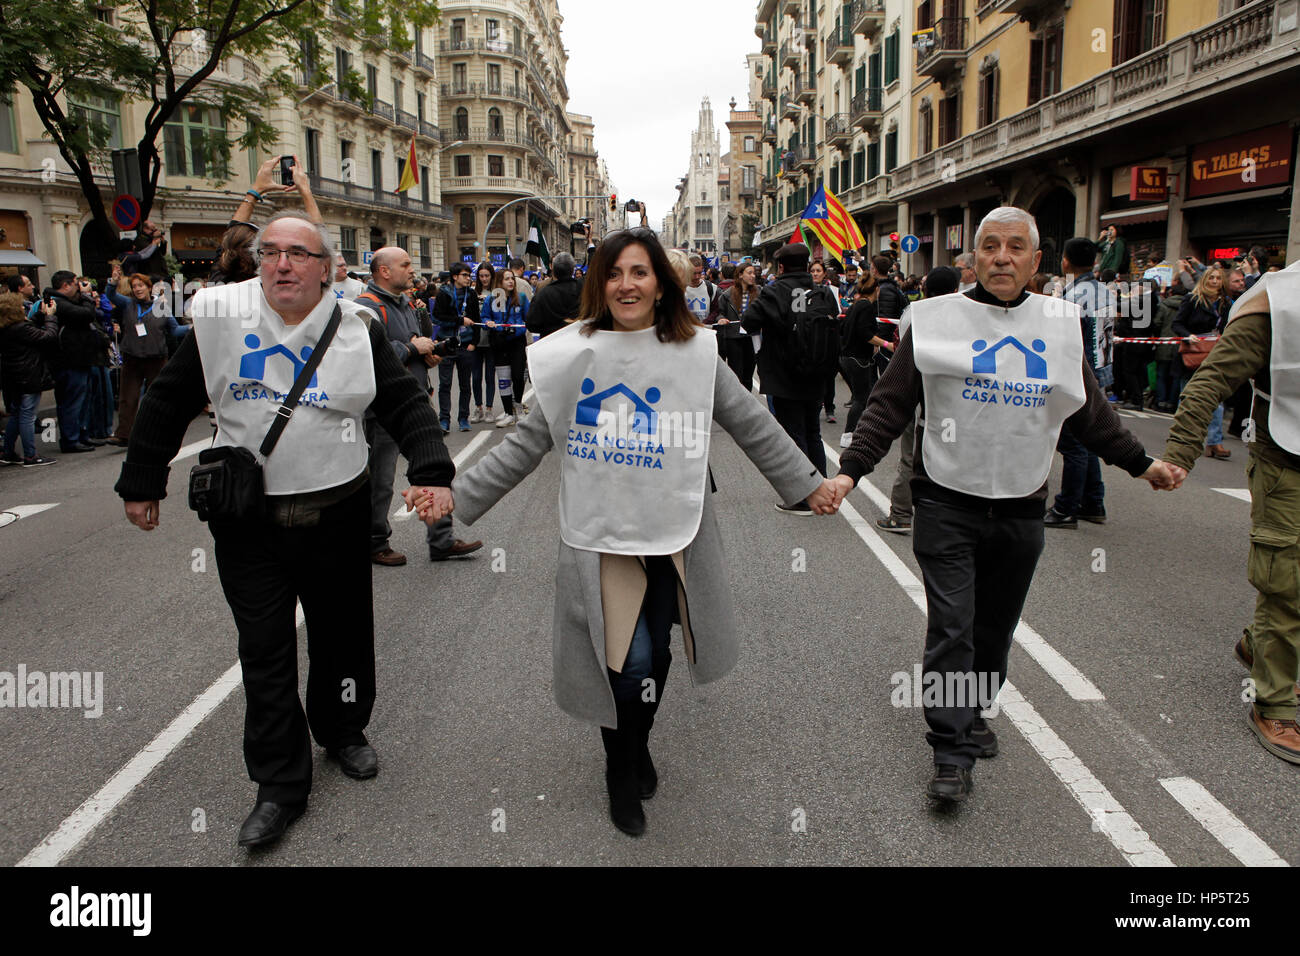 Barcelona, Spain. 18th Feb, 2017. Around 160,000 people demonstrate on Via Laietana, central Barcelona, demanding the government to allow more refugees and to show support for refugees escaping the atrocities in war torn areas such as Syria. Credit: rich bowen/Alamy Live News Stock Photo